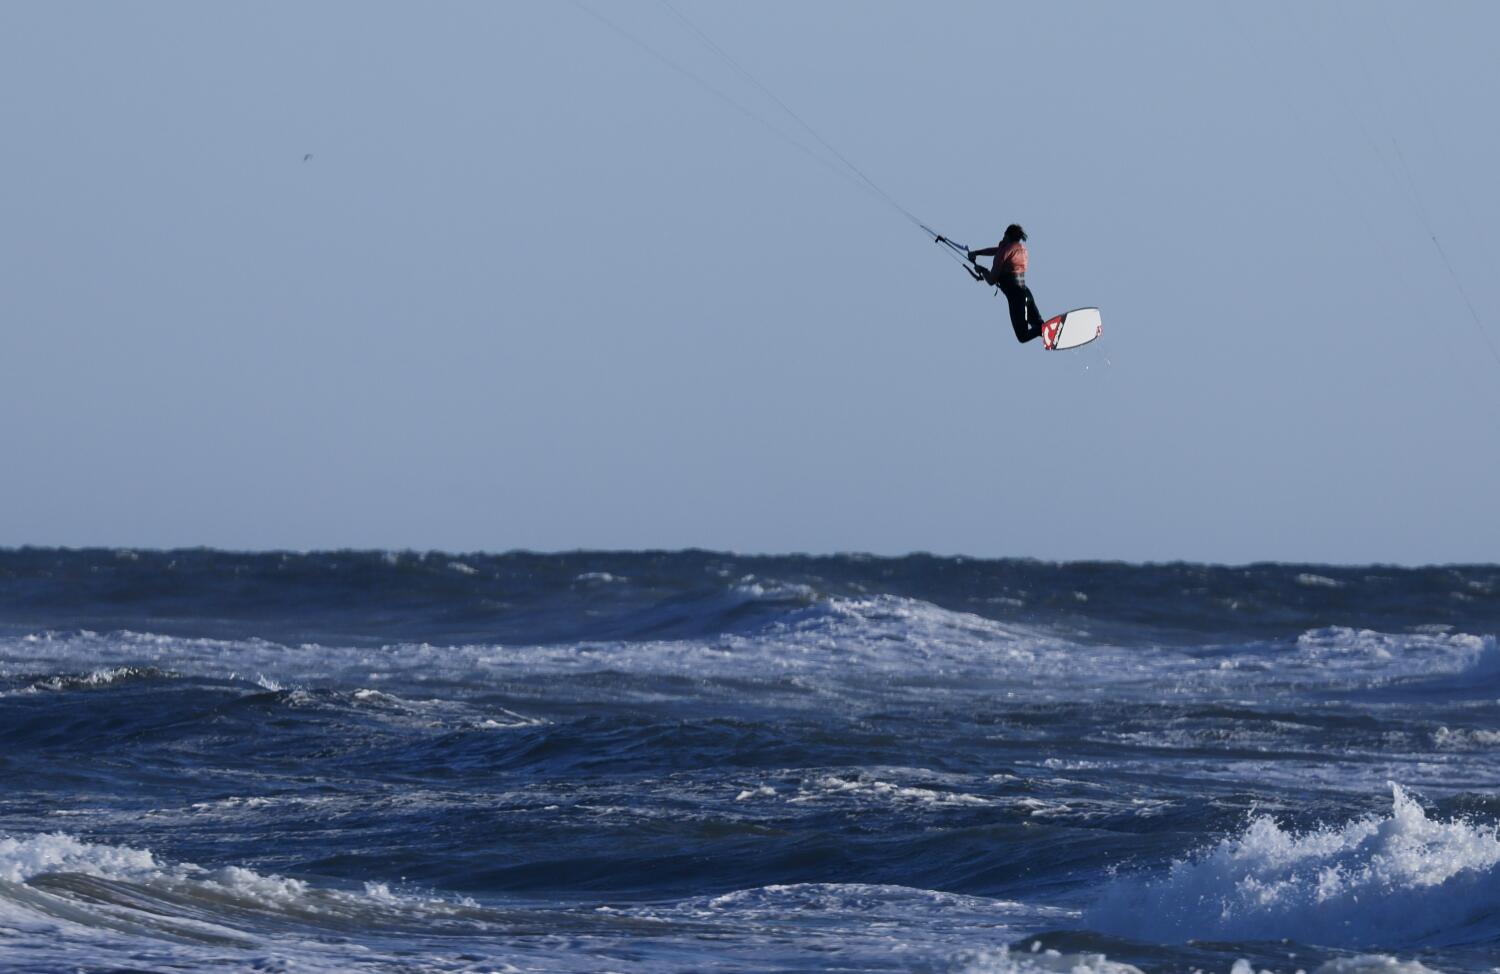 The upside of atmospheric rivers? The kitesurfing is crazy good